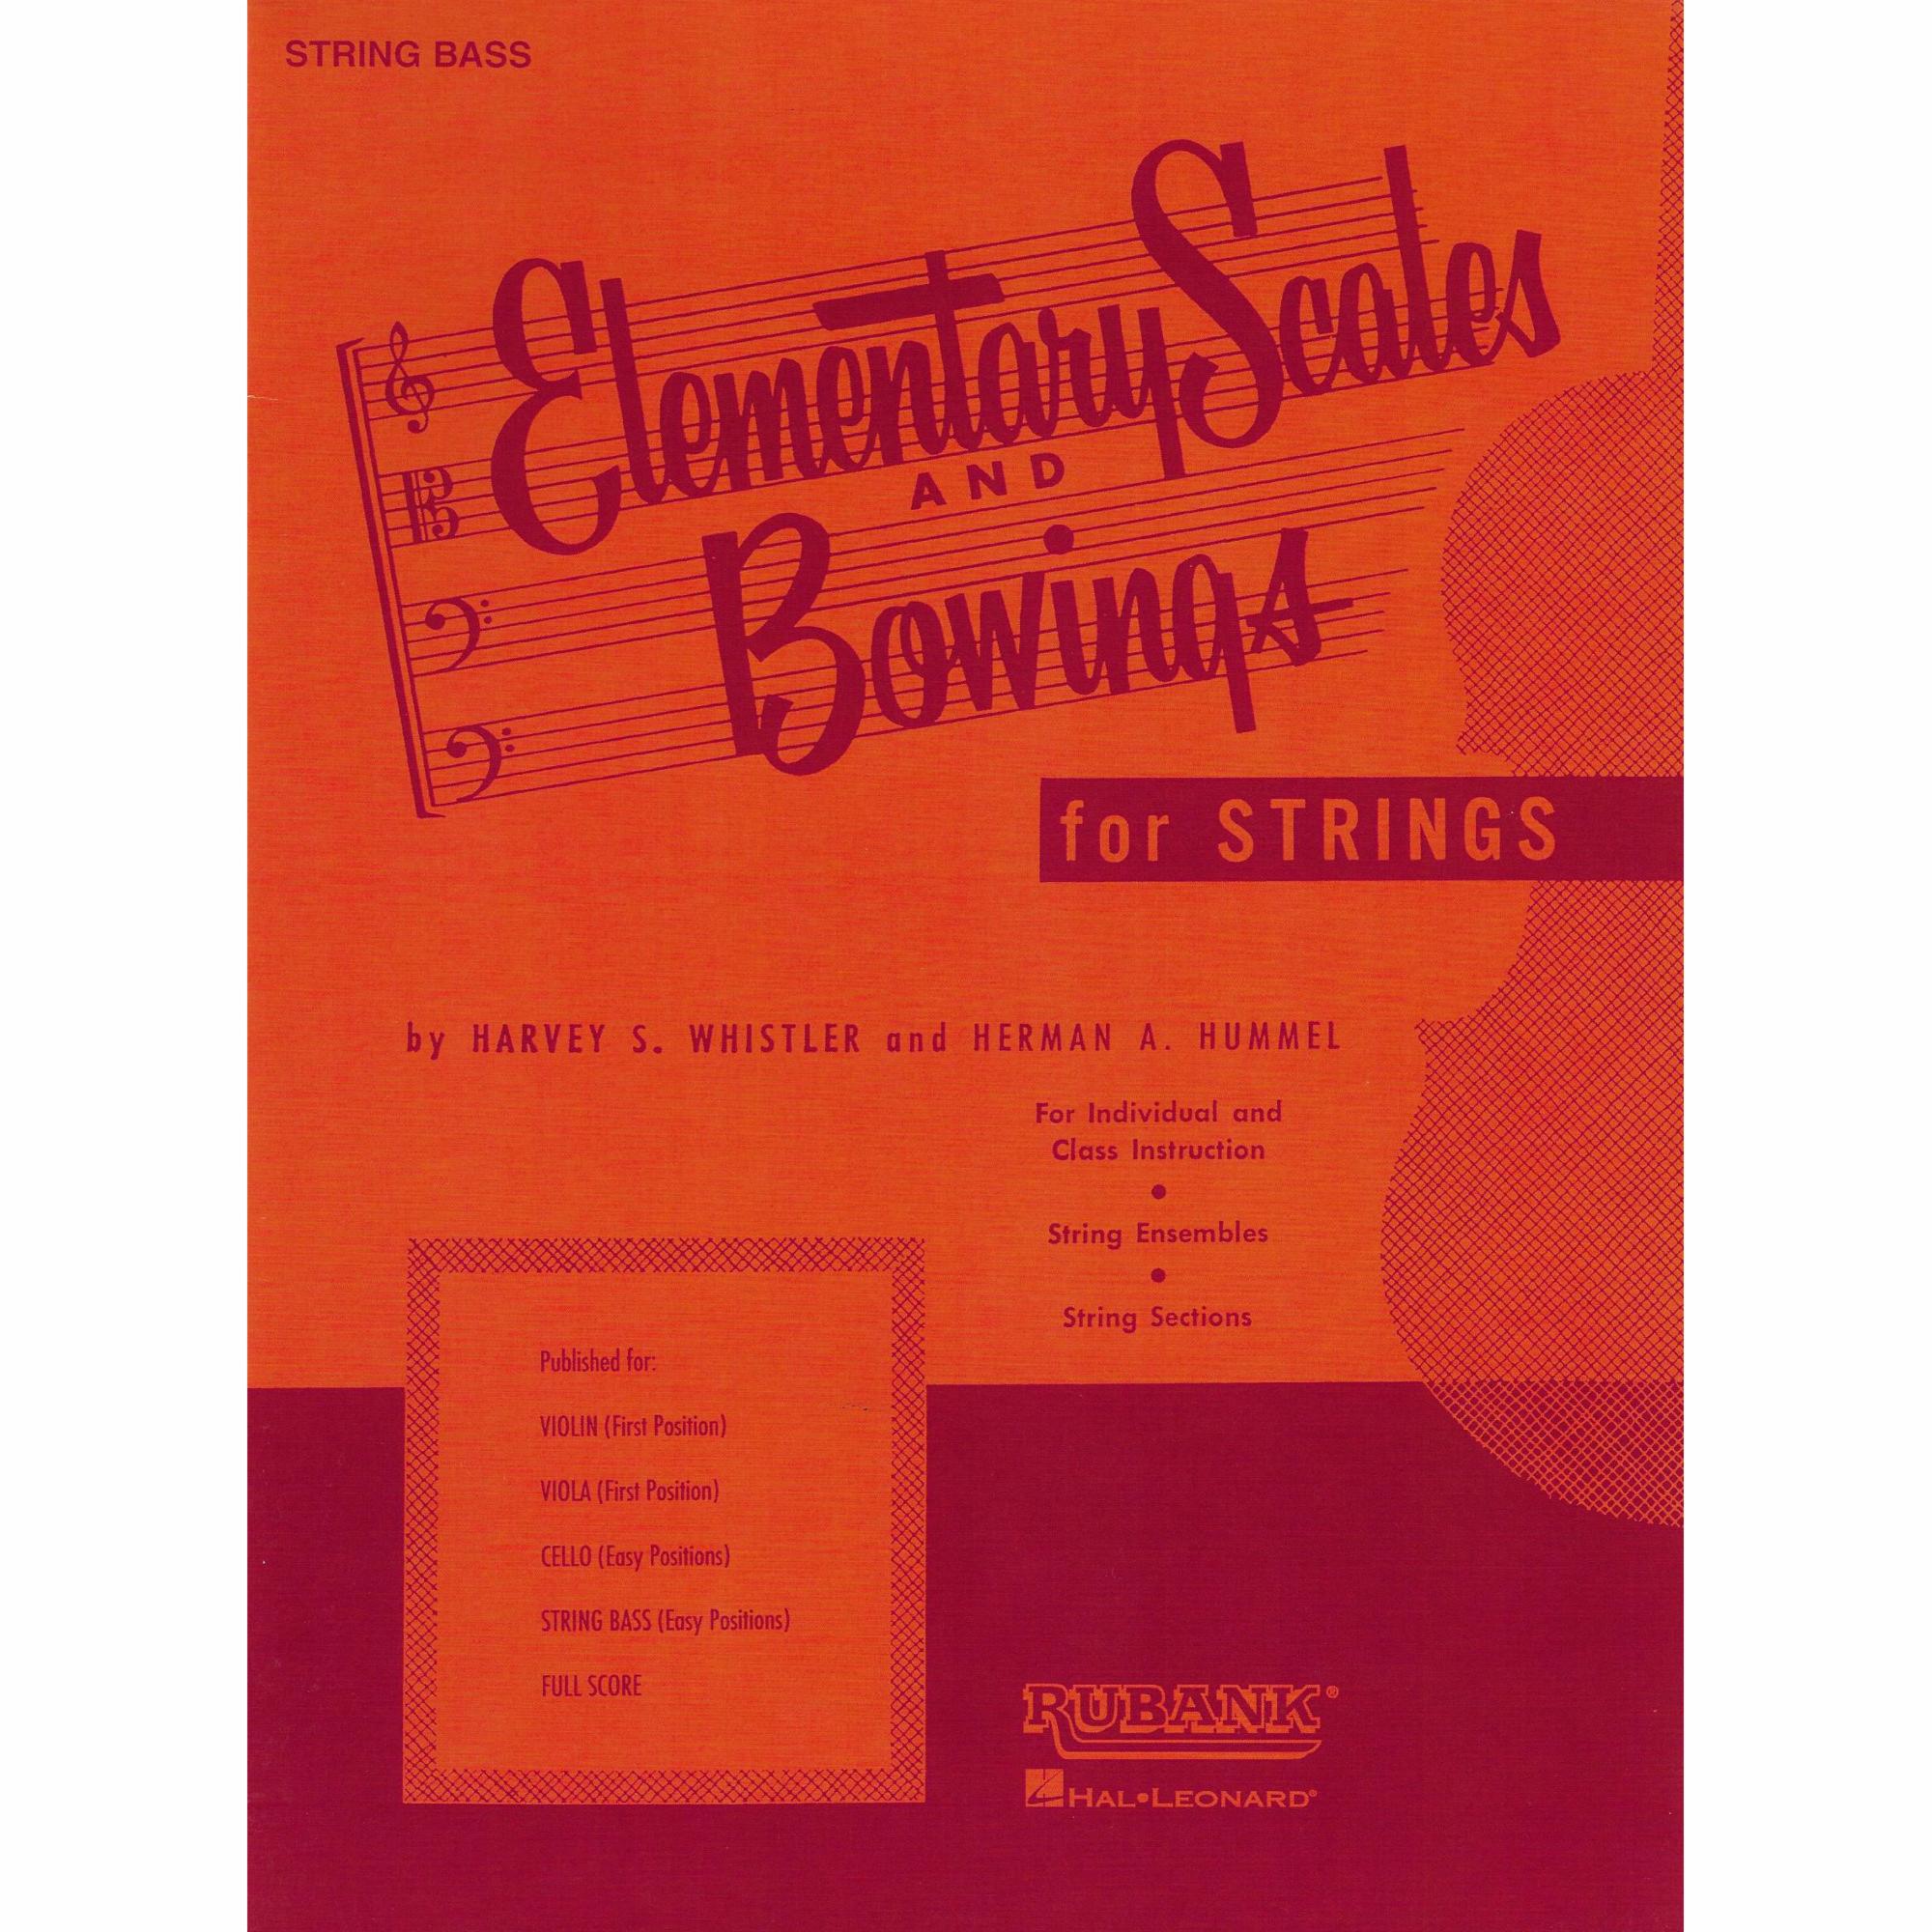 Elementary Scales and Bowings for Bass